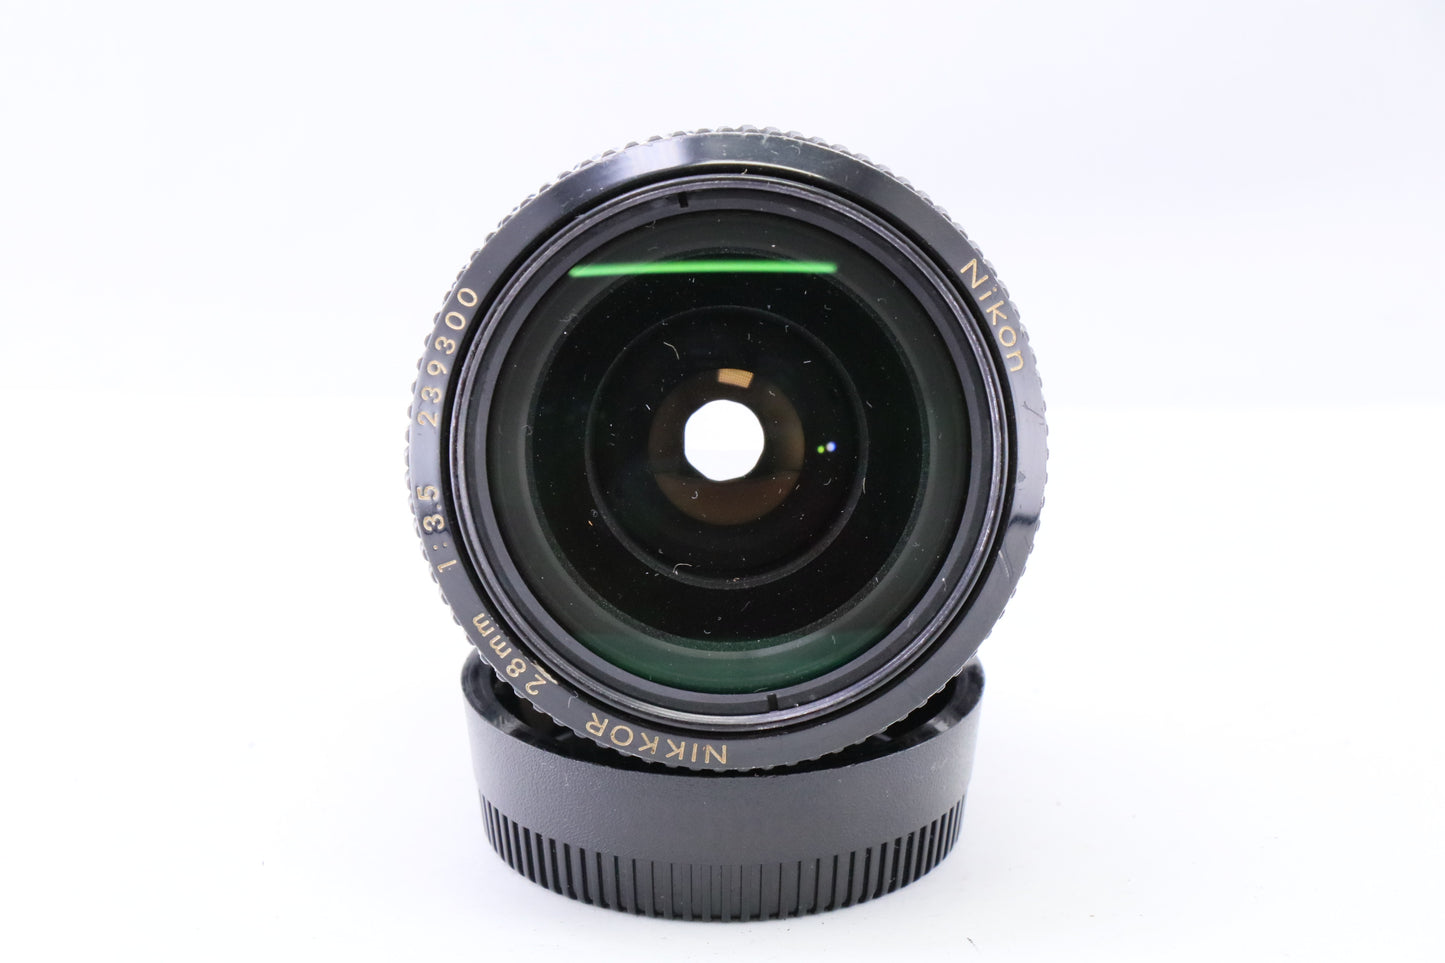 New NIKKOR 28mm F3.5 Ai改 [1116969538214]